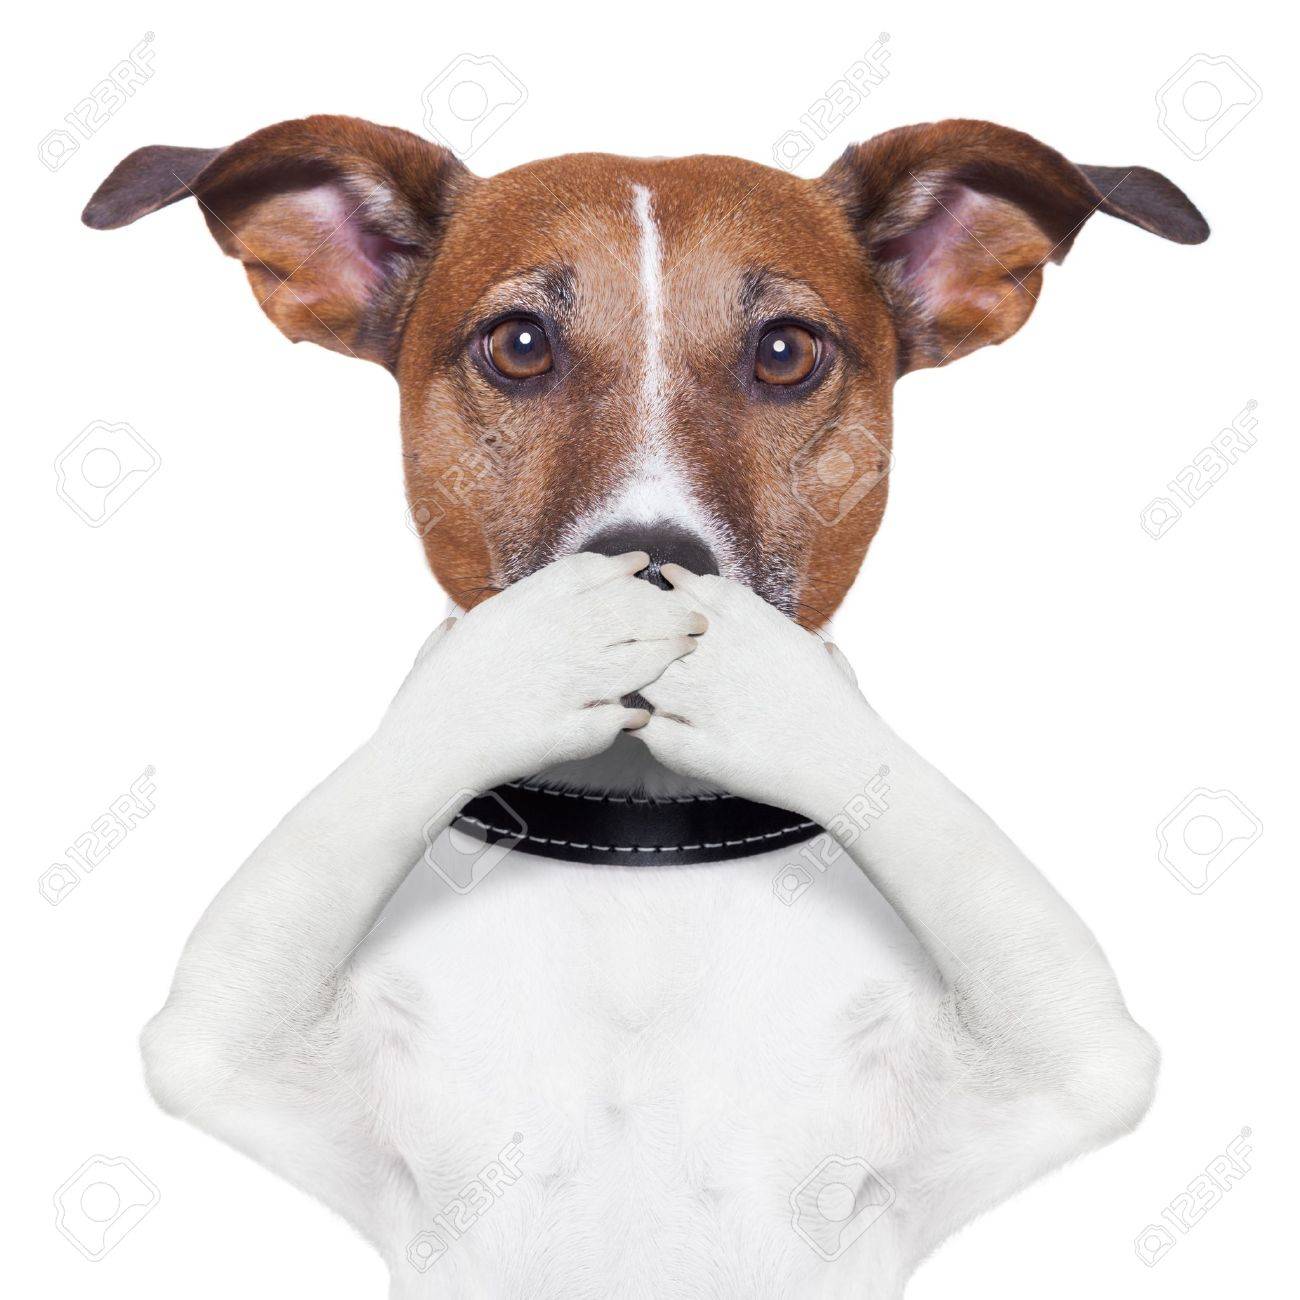 16901271-covering-the-mouth-dog-with-paws-Stock-Photo-dog-silence-no.jpg